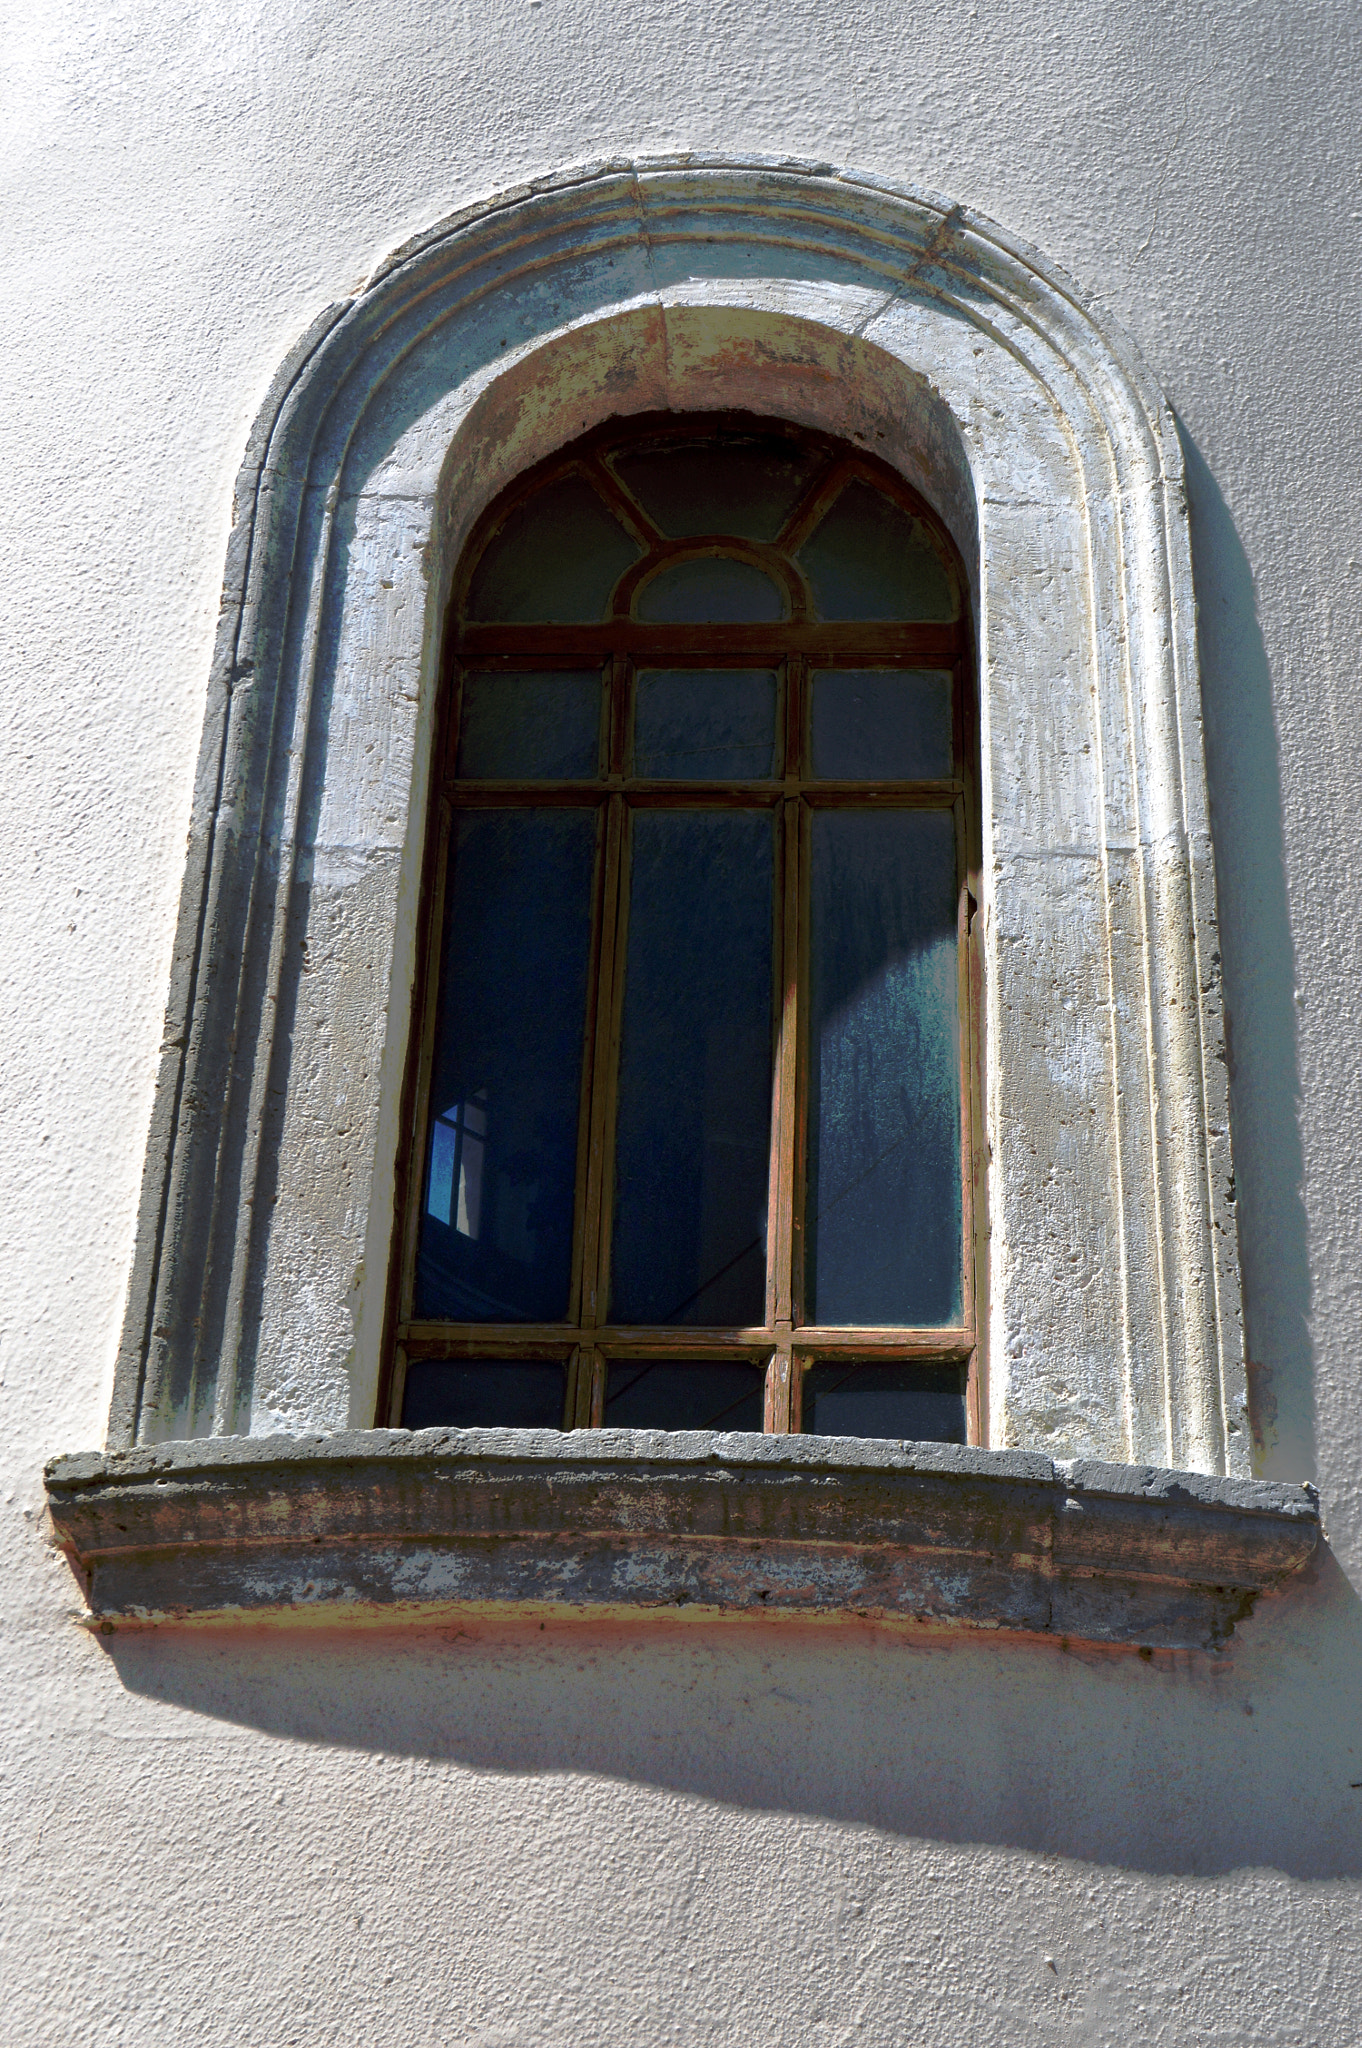 A window on a tower.